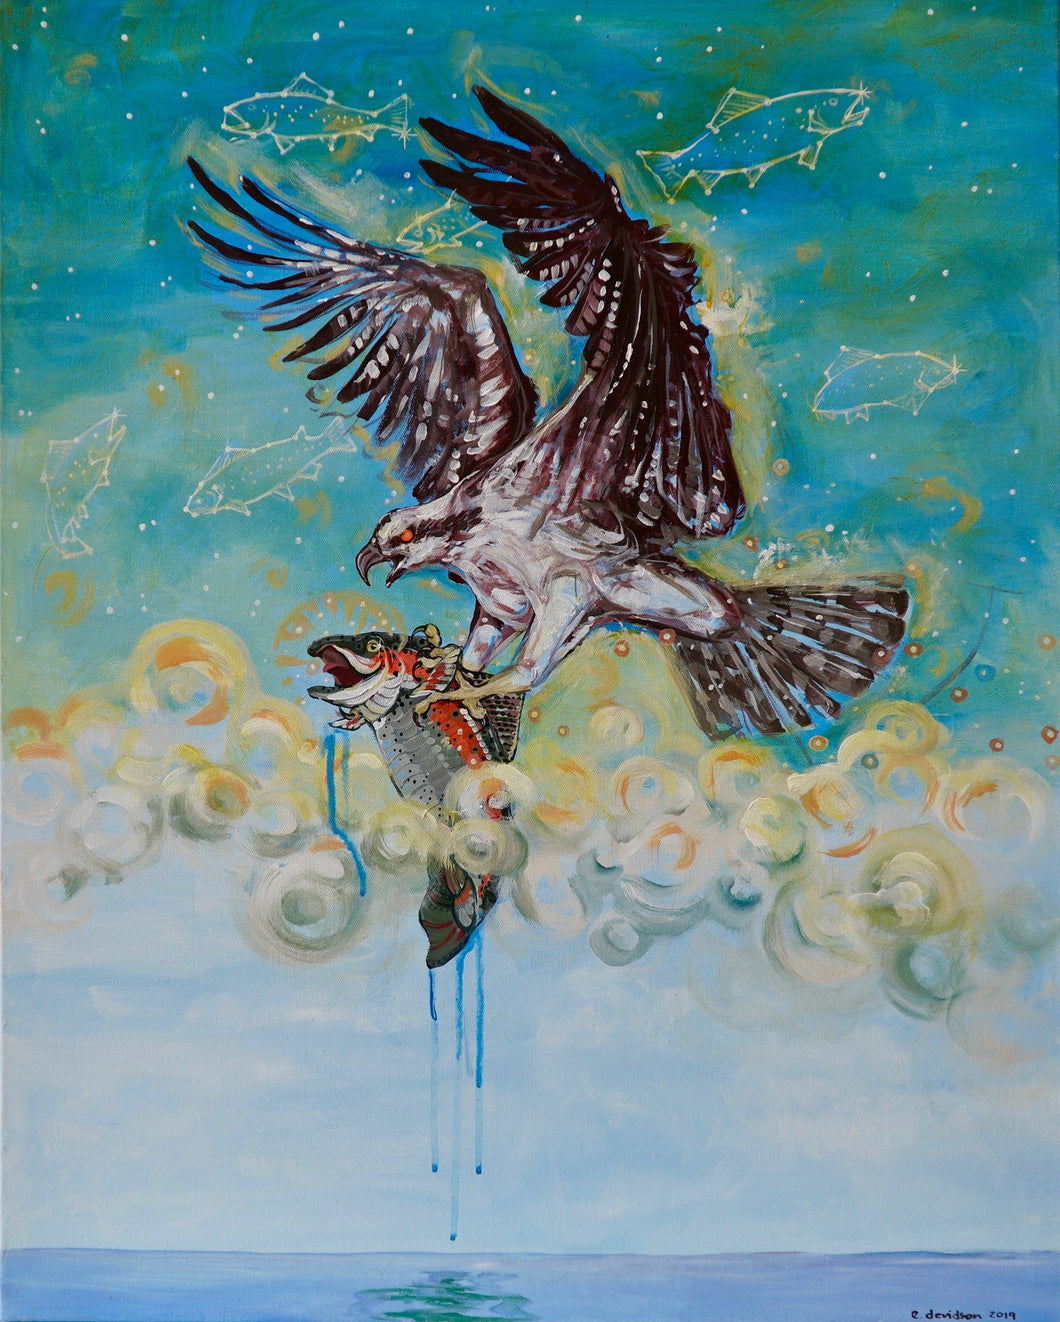 Emily Davidson Painting | Ascension of Fish (acrylic on canvas)